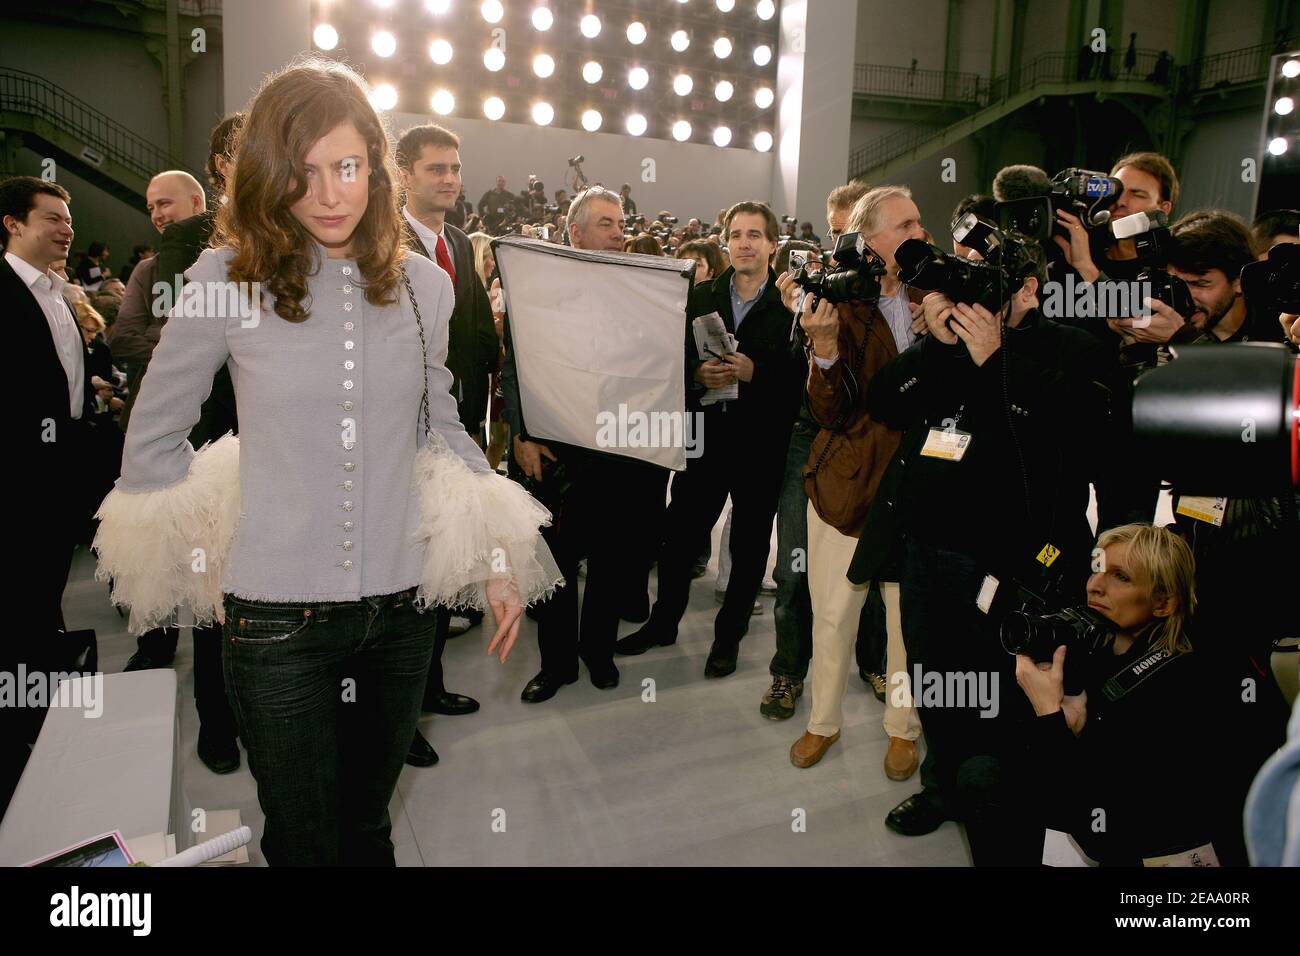 French actress Anna Mouglalis attends the presentation of German fashion designer Karl Lagerfeld's Spring-Summer 2006 ready-to-wear collection for French fashion house Chanel at the Grand Palais in Paris, France, on October 7, 2005. Photo by Nebinger-Orban-Zabulon/ABACAPRESS.COM Stock Photo